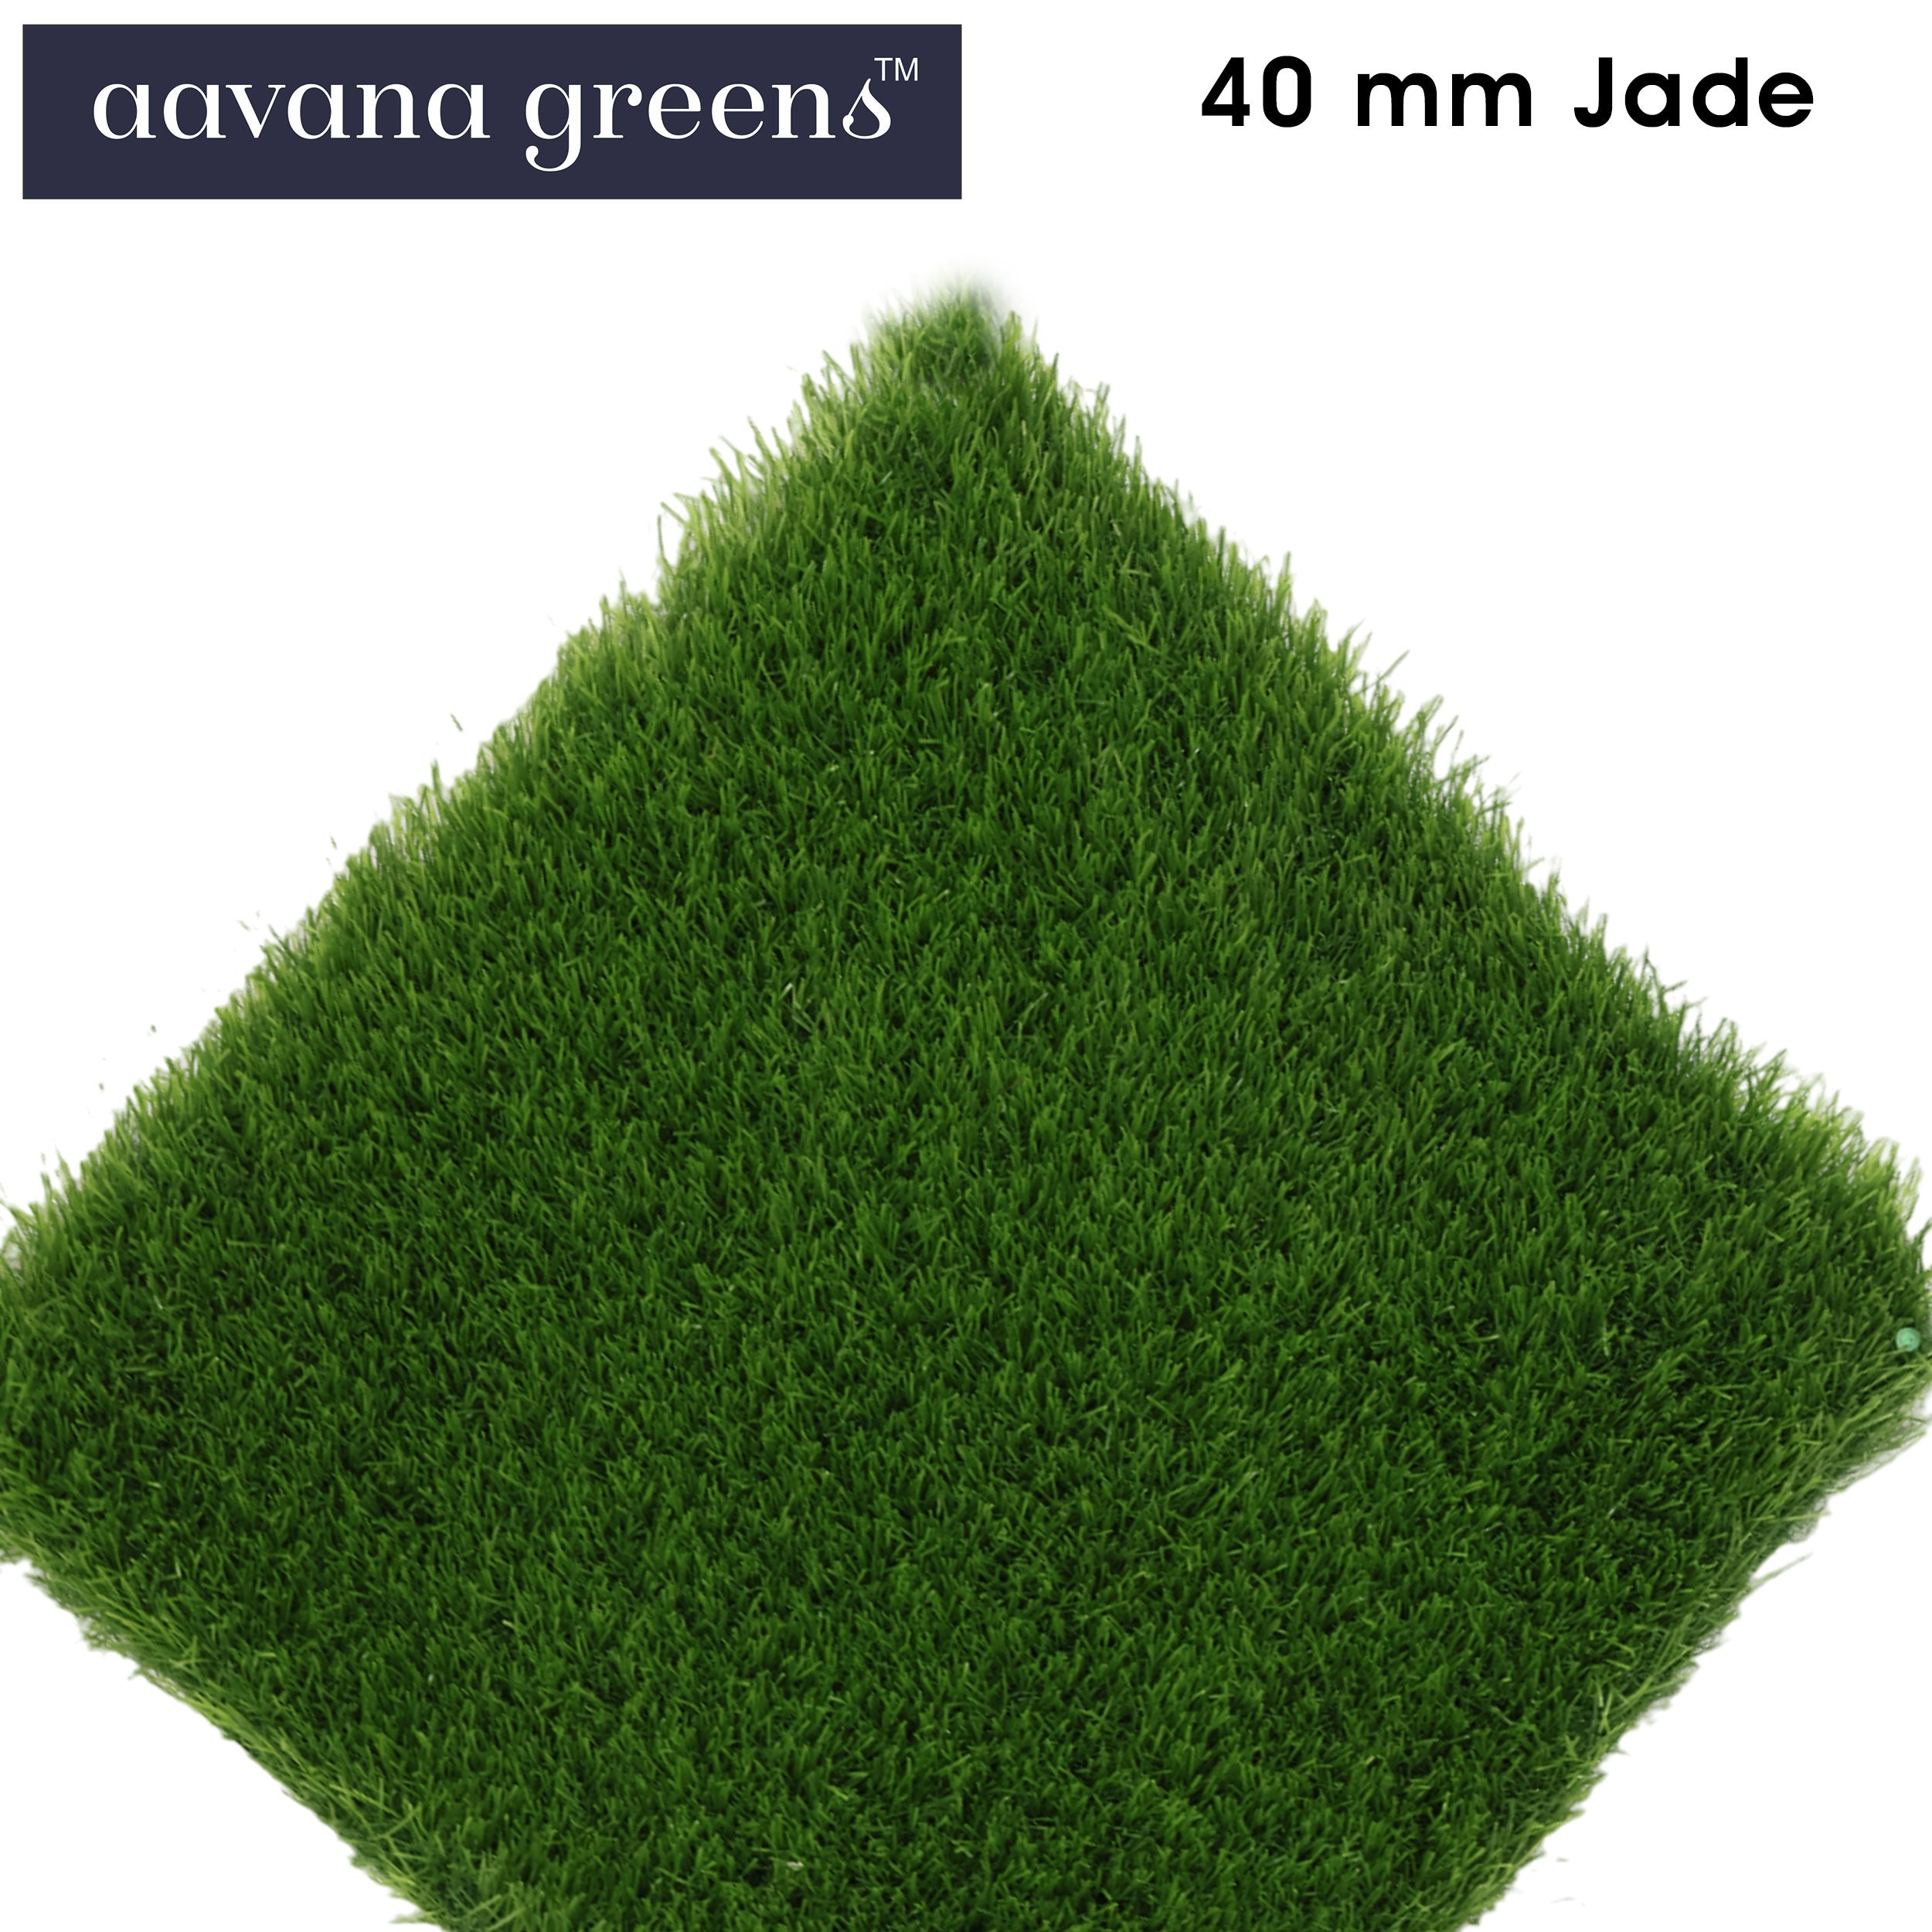 40mm Jade Artificial Grass 6.5 Feet Width PE & PU Material Grass For Indoor And Outdoor Use